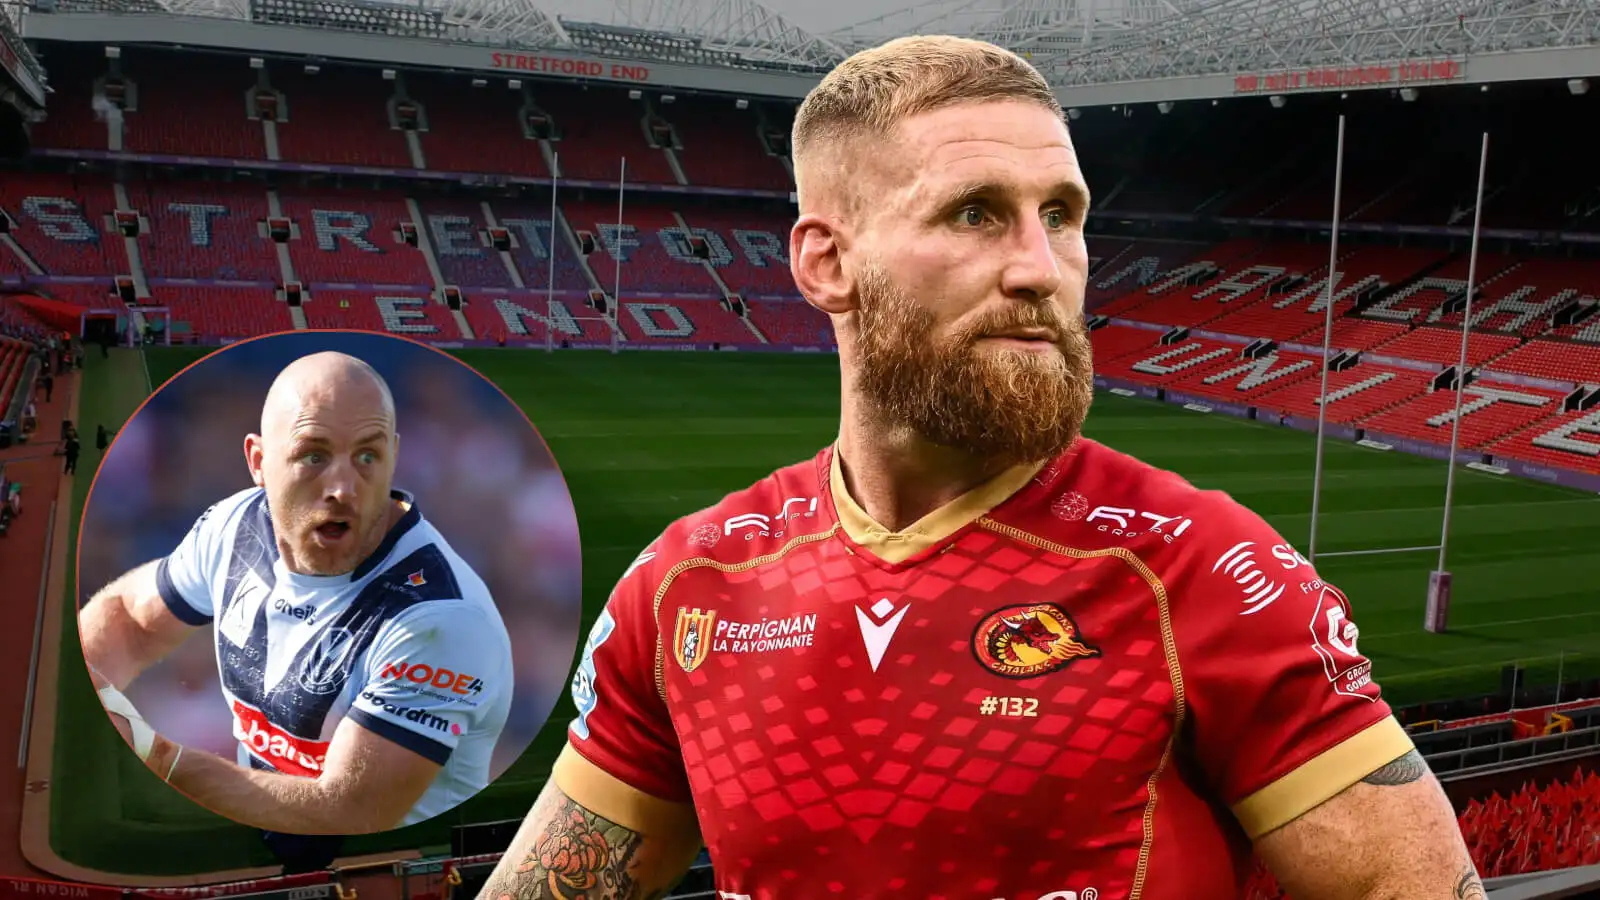 Retiring legends Sam Tomkins & James Roby hailed ahead of semi-final: ‘They are maybe the last of their era’